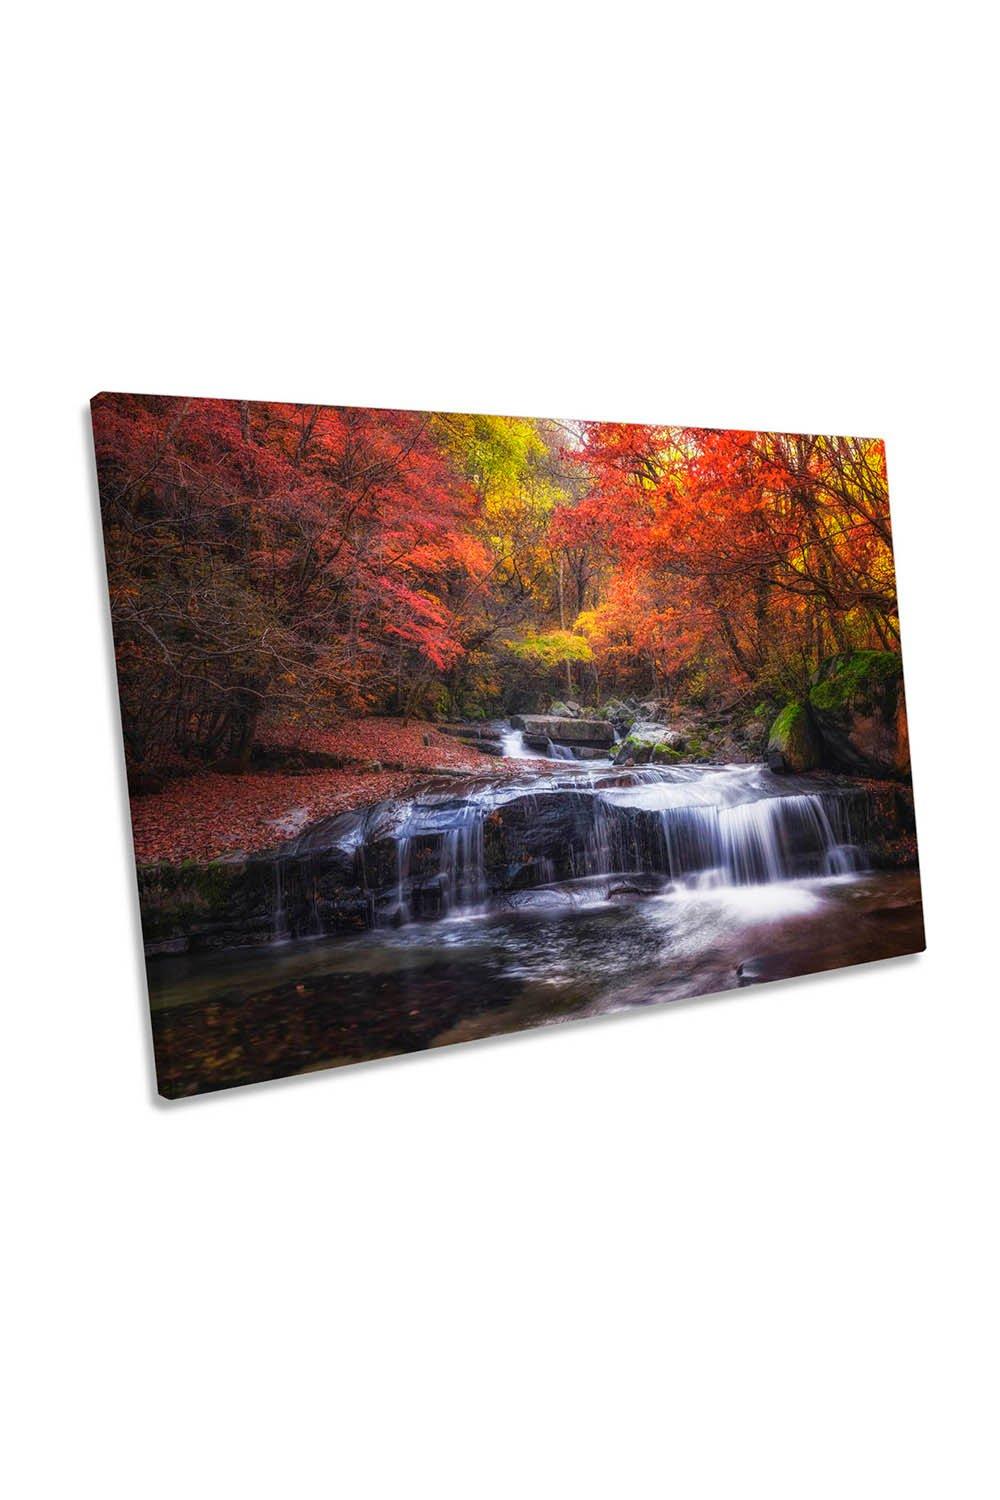 Autumn Waterfall River Landscape Canvas Wall Art Picture Print